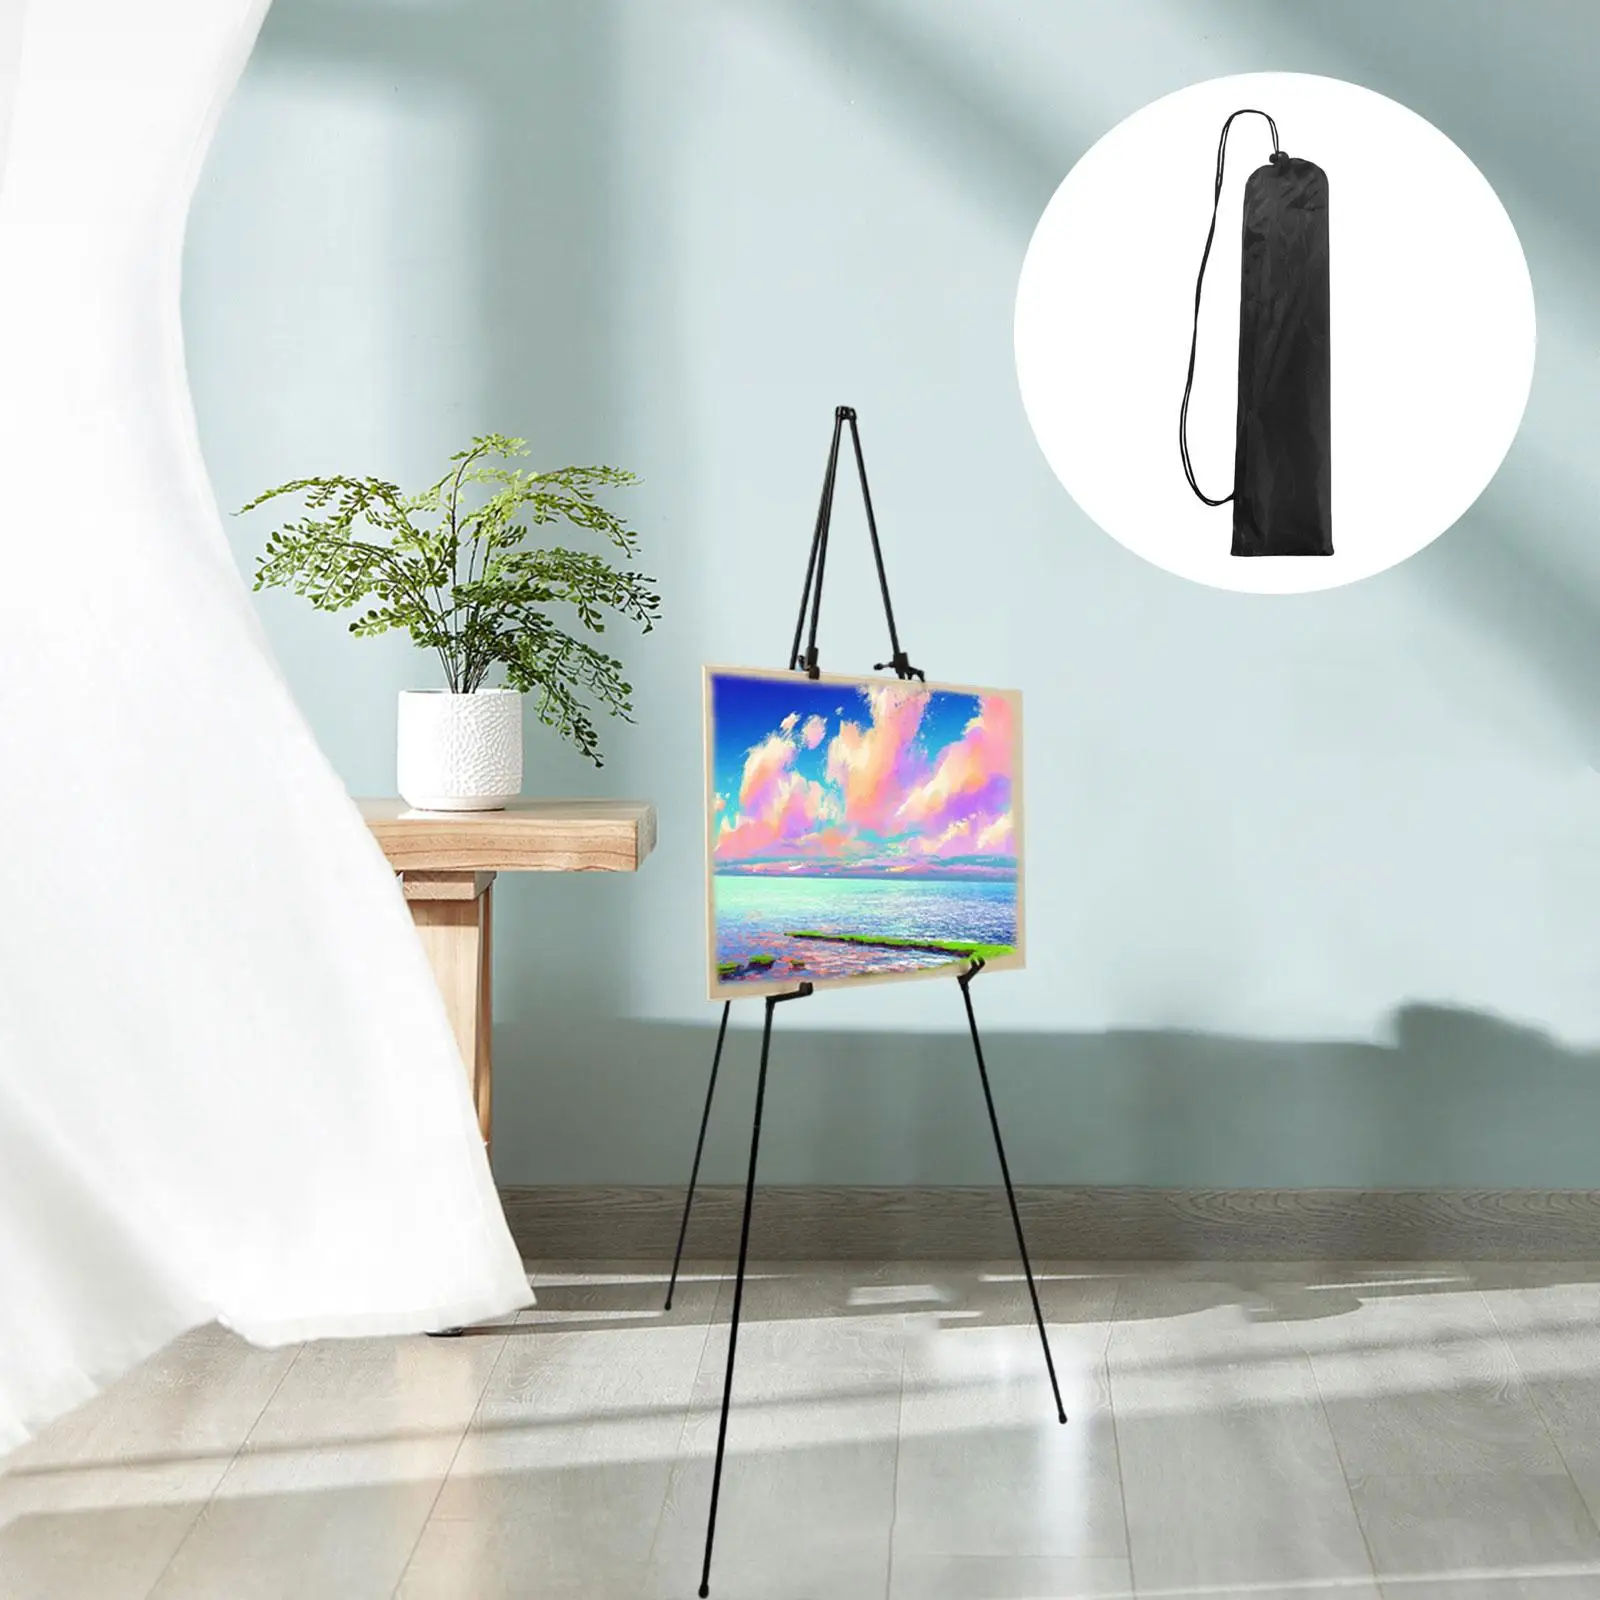 Tripod Display Easel Stand Holder Displaying Art Collapsible Tabletop Easels Painting Art Easel for Party